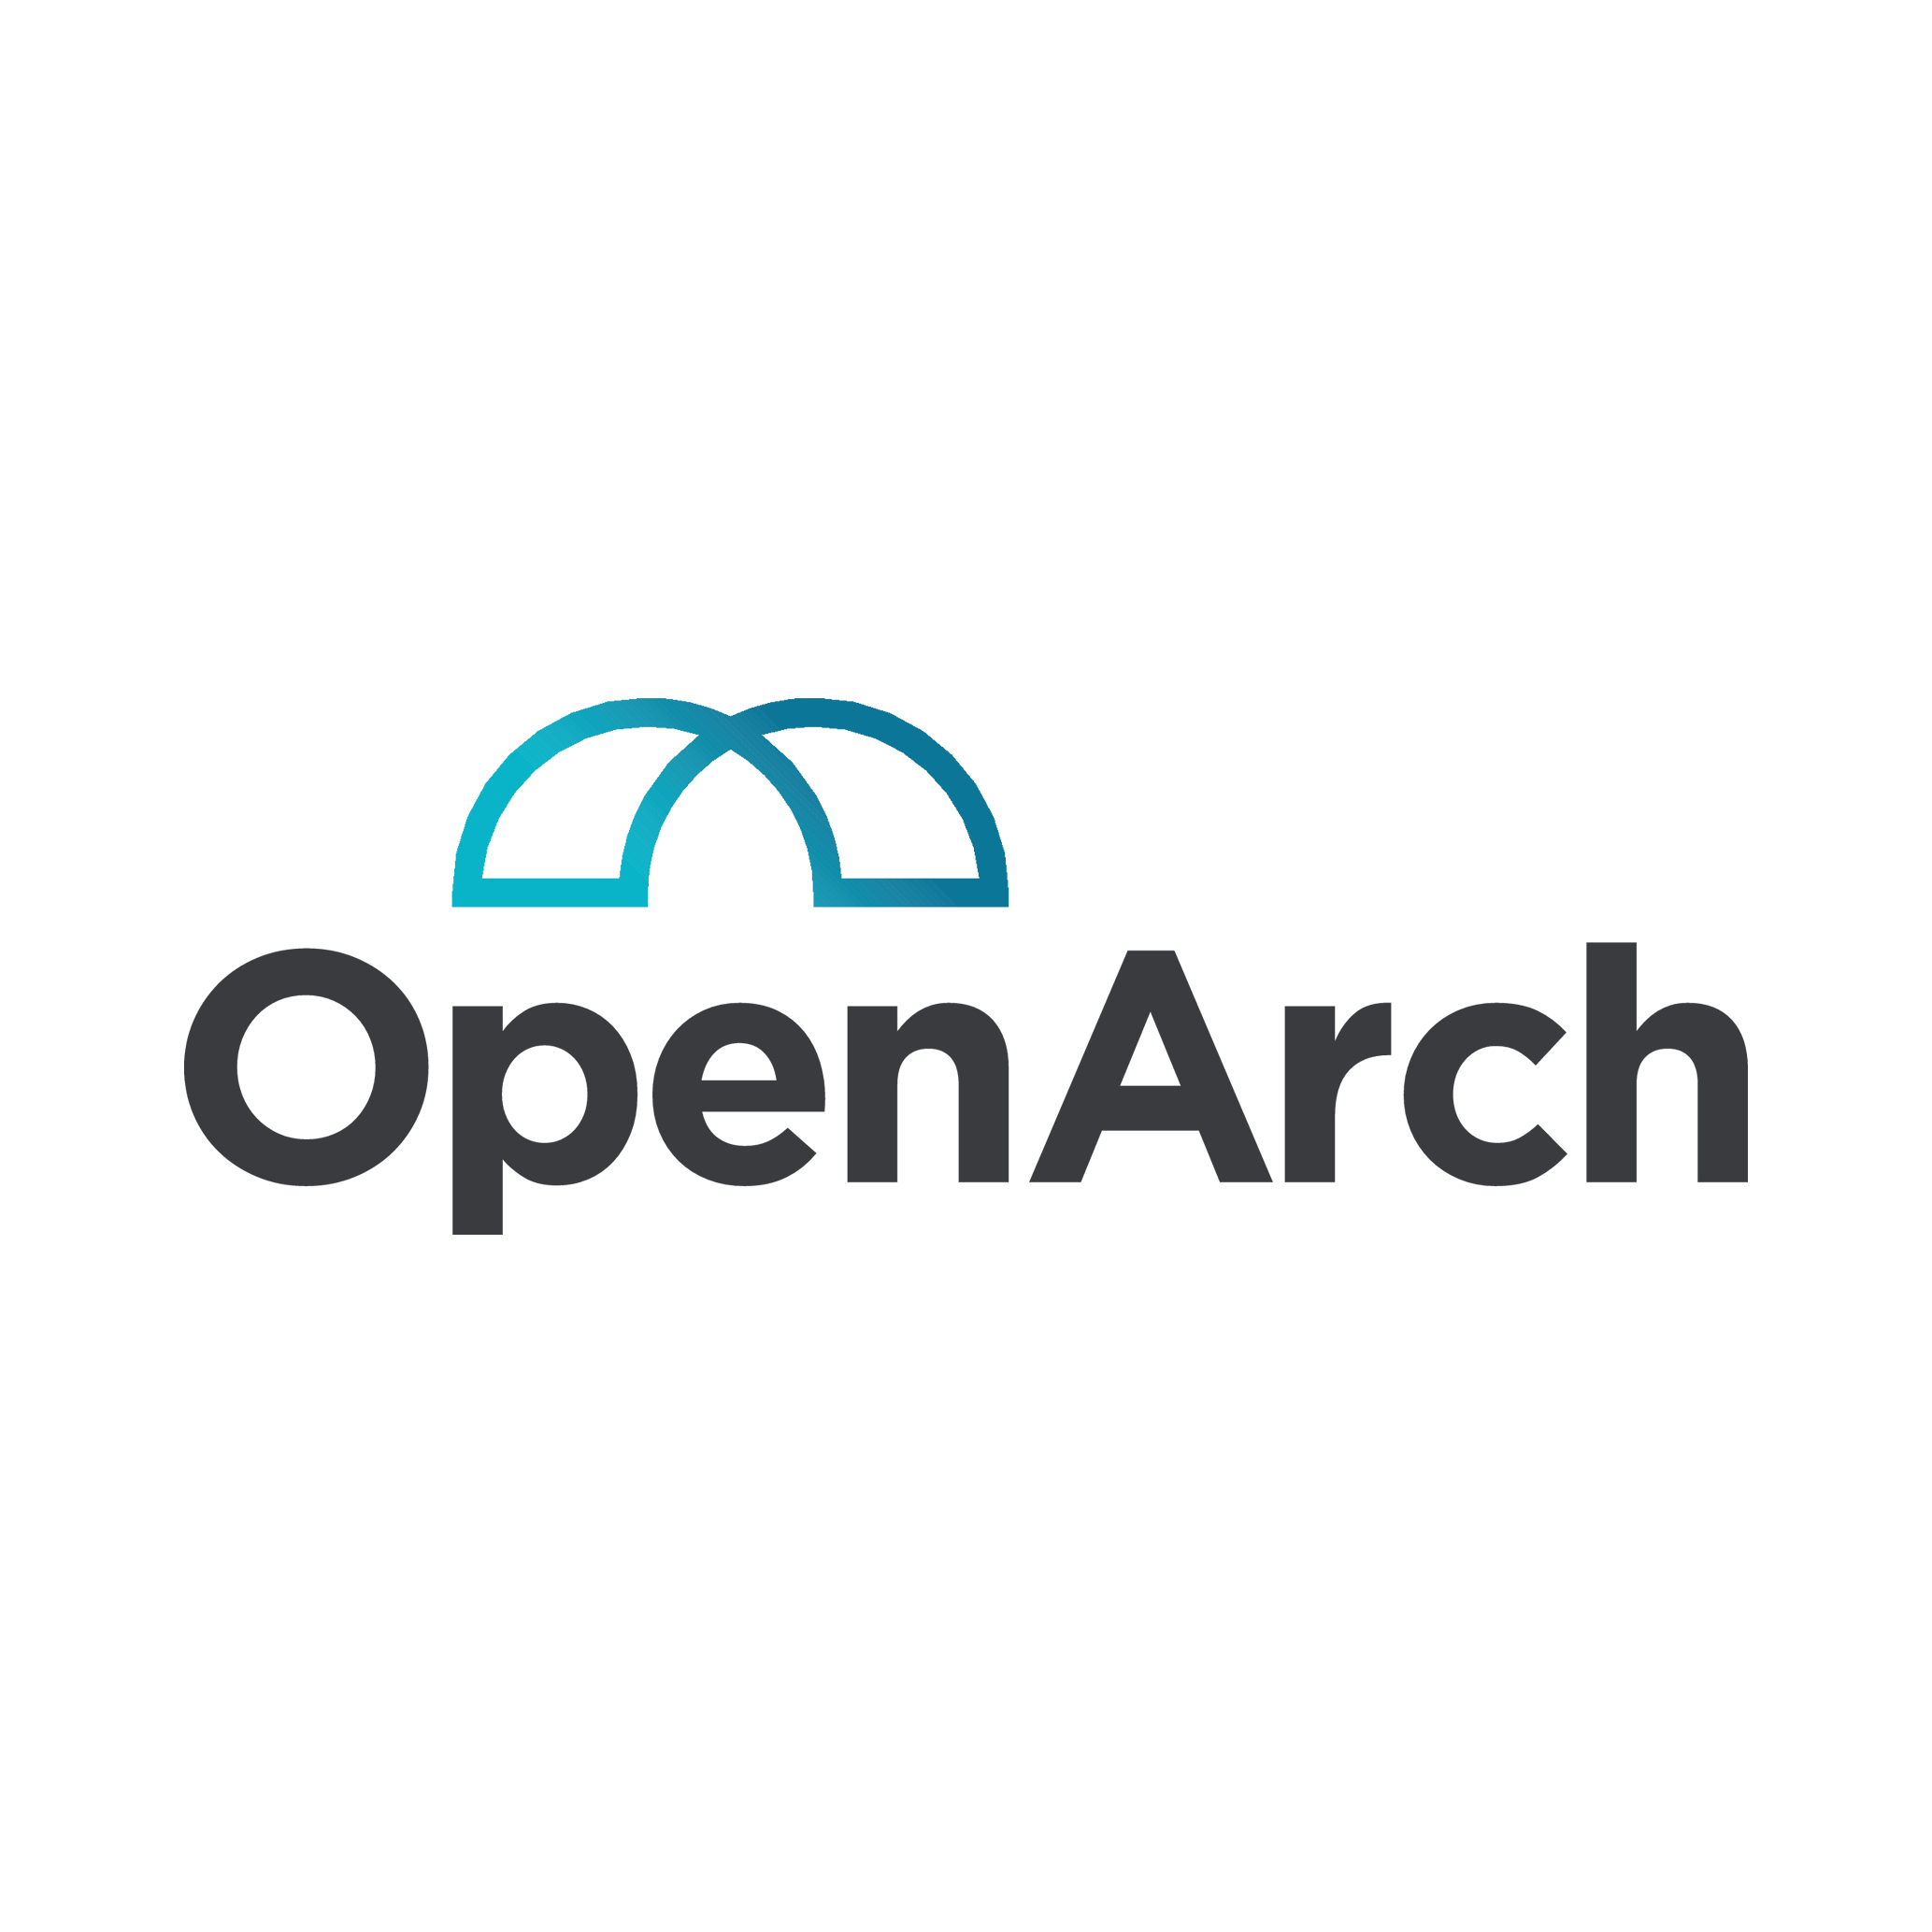 OpenArch Properties Limited